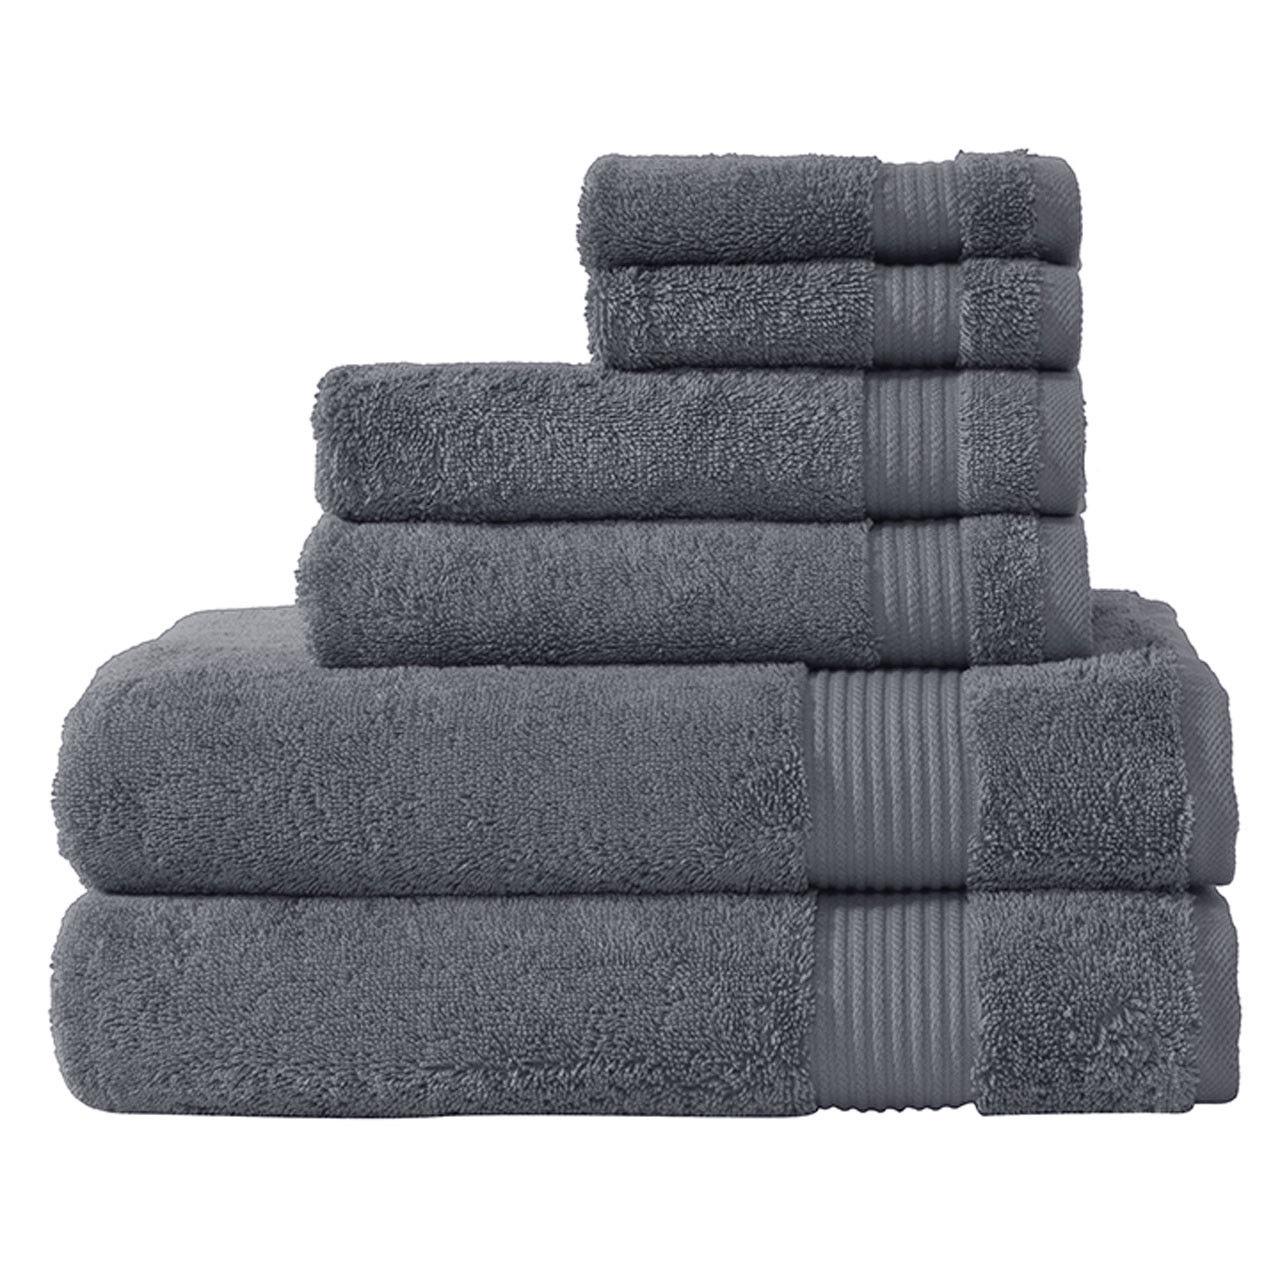 Can you list what the Amadeus Turkish gray towels collection set comprises of?